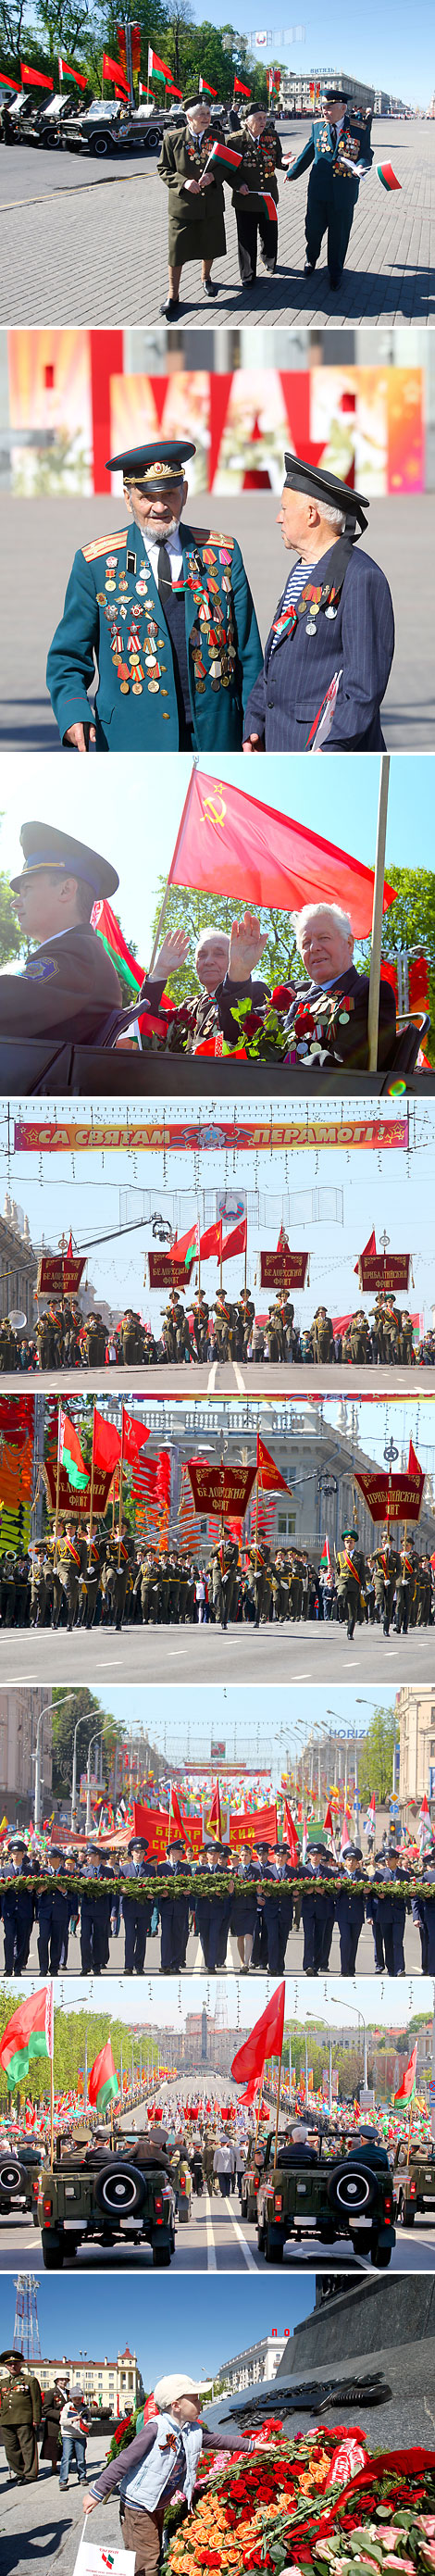 Victory Day procession in Minsk. During the celebrations, 2012